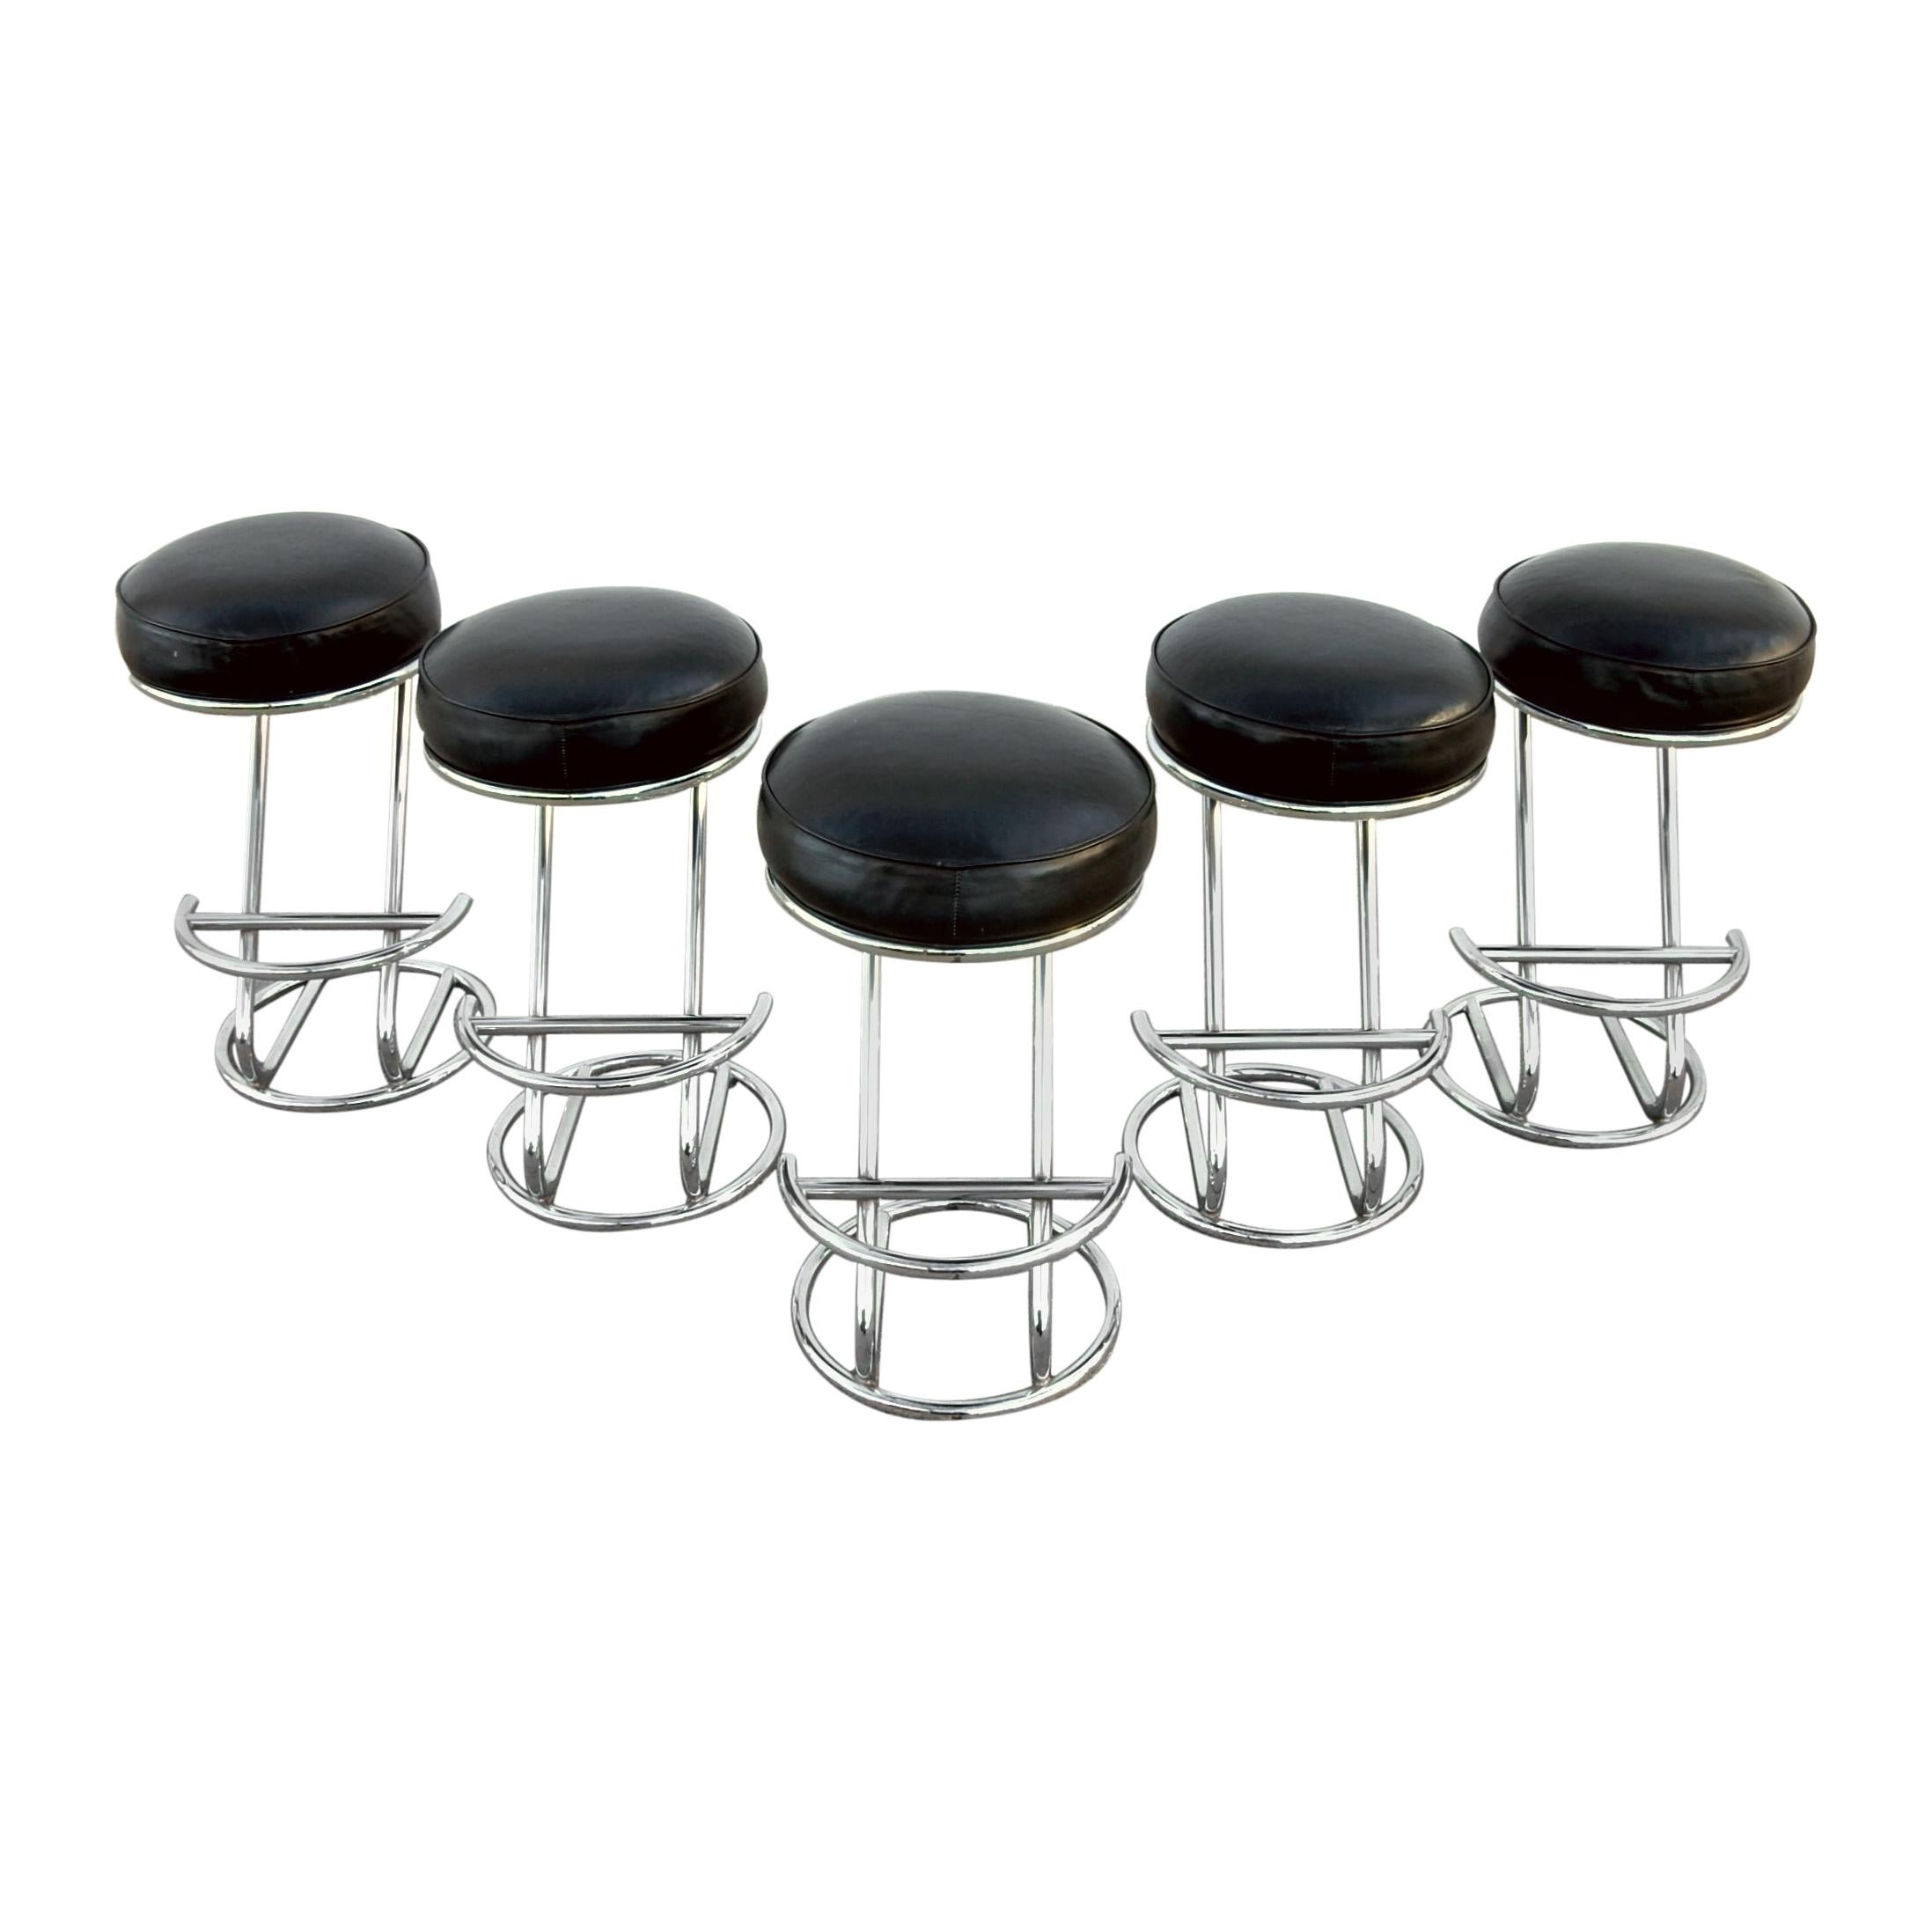 Steel Art Deco Chrome and Leather Bar Stools, Set of 5